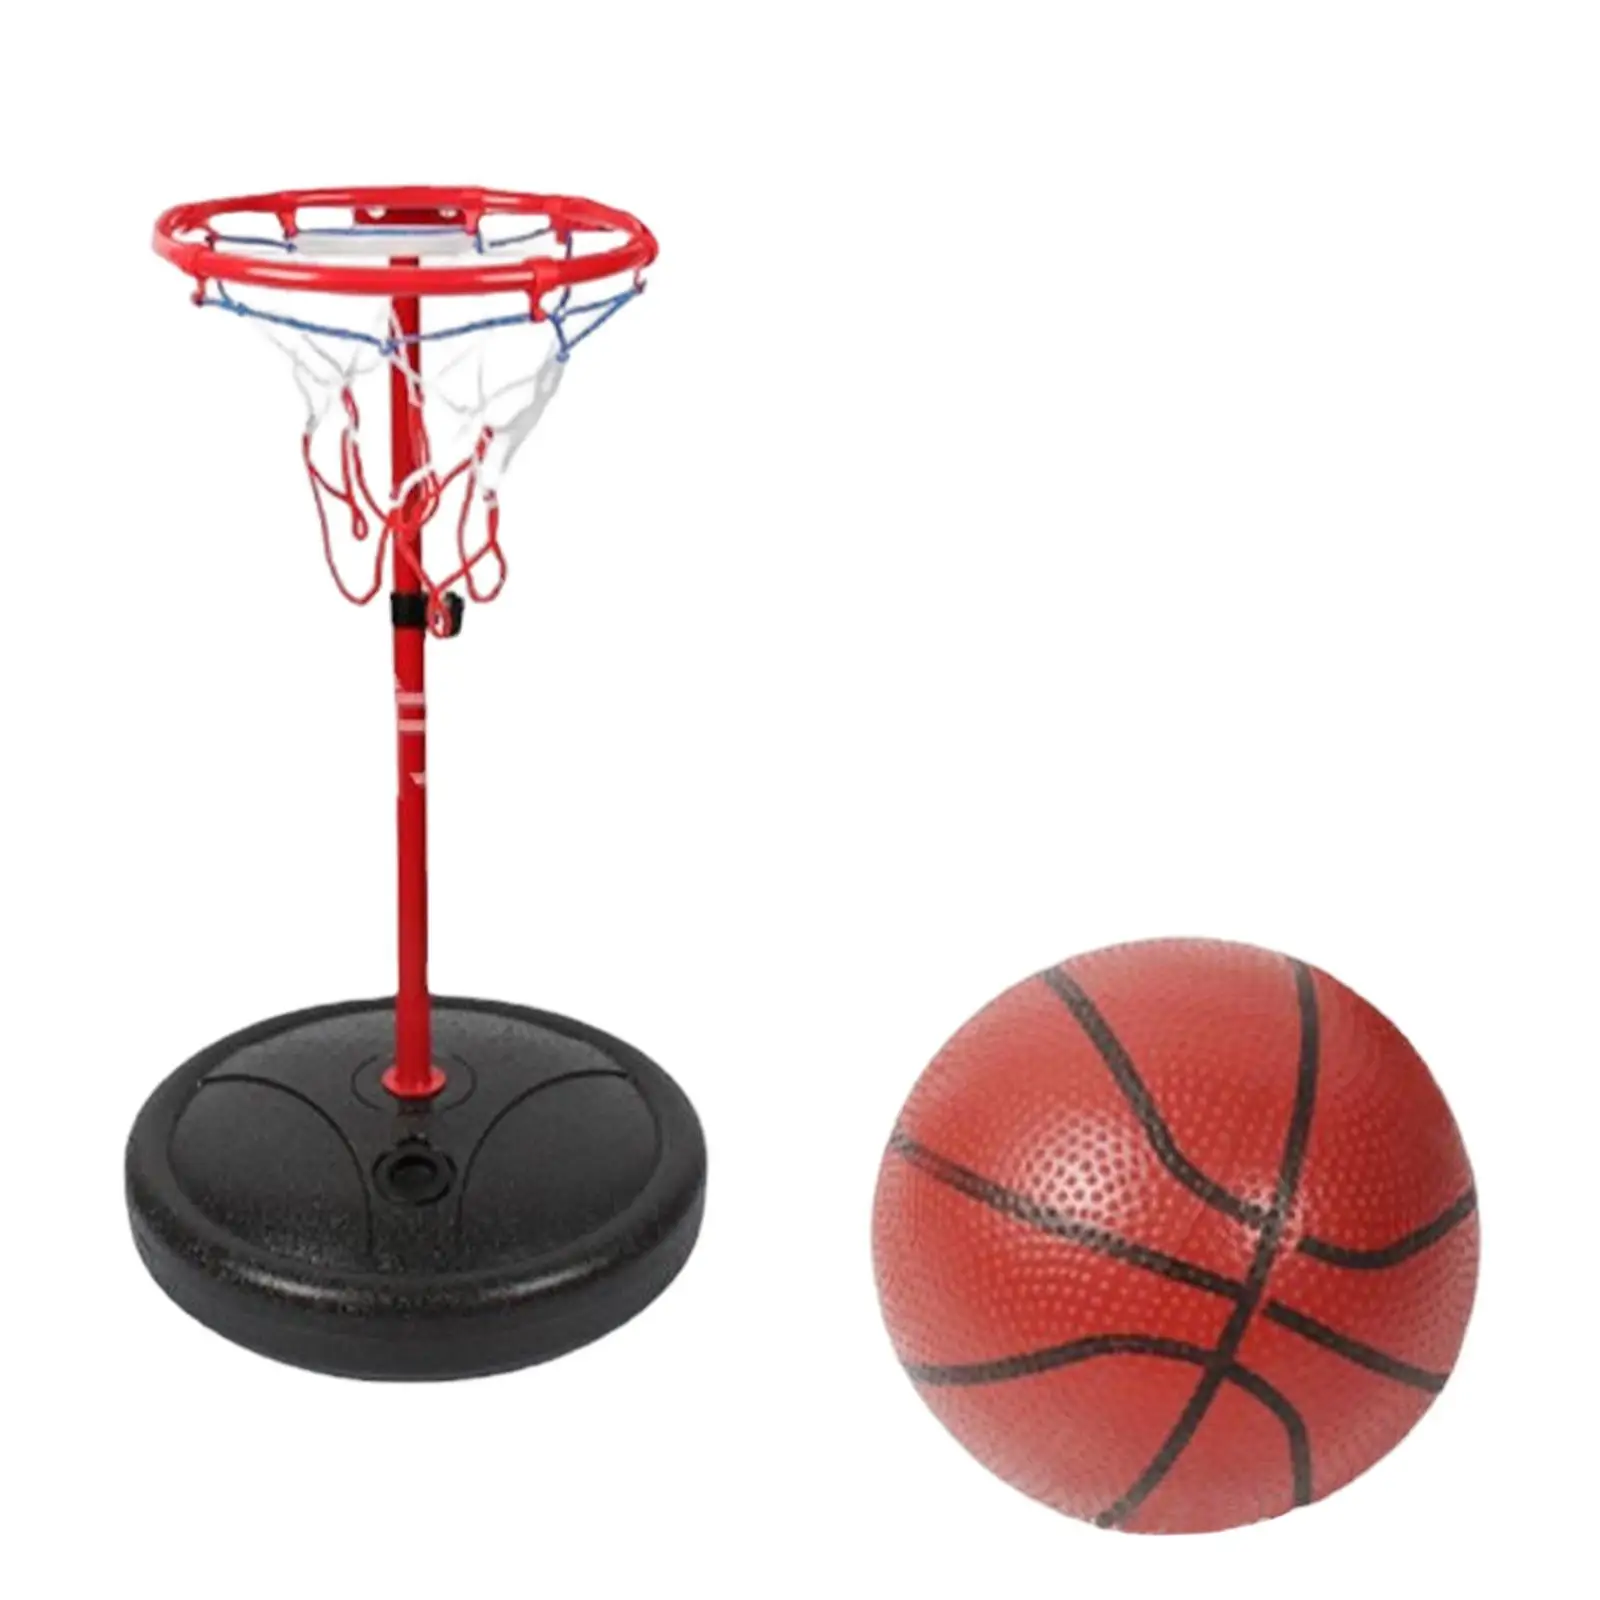 Floating Pool Basketball Hoop Water Basketball Stand for Teens Adults Family